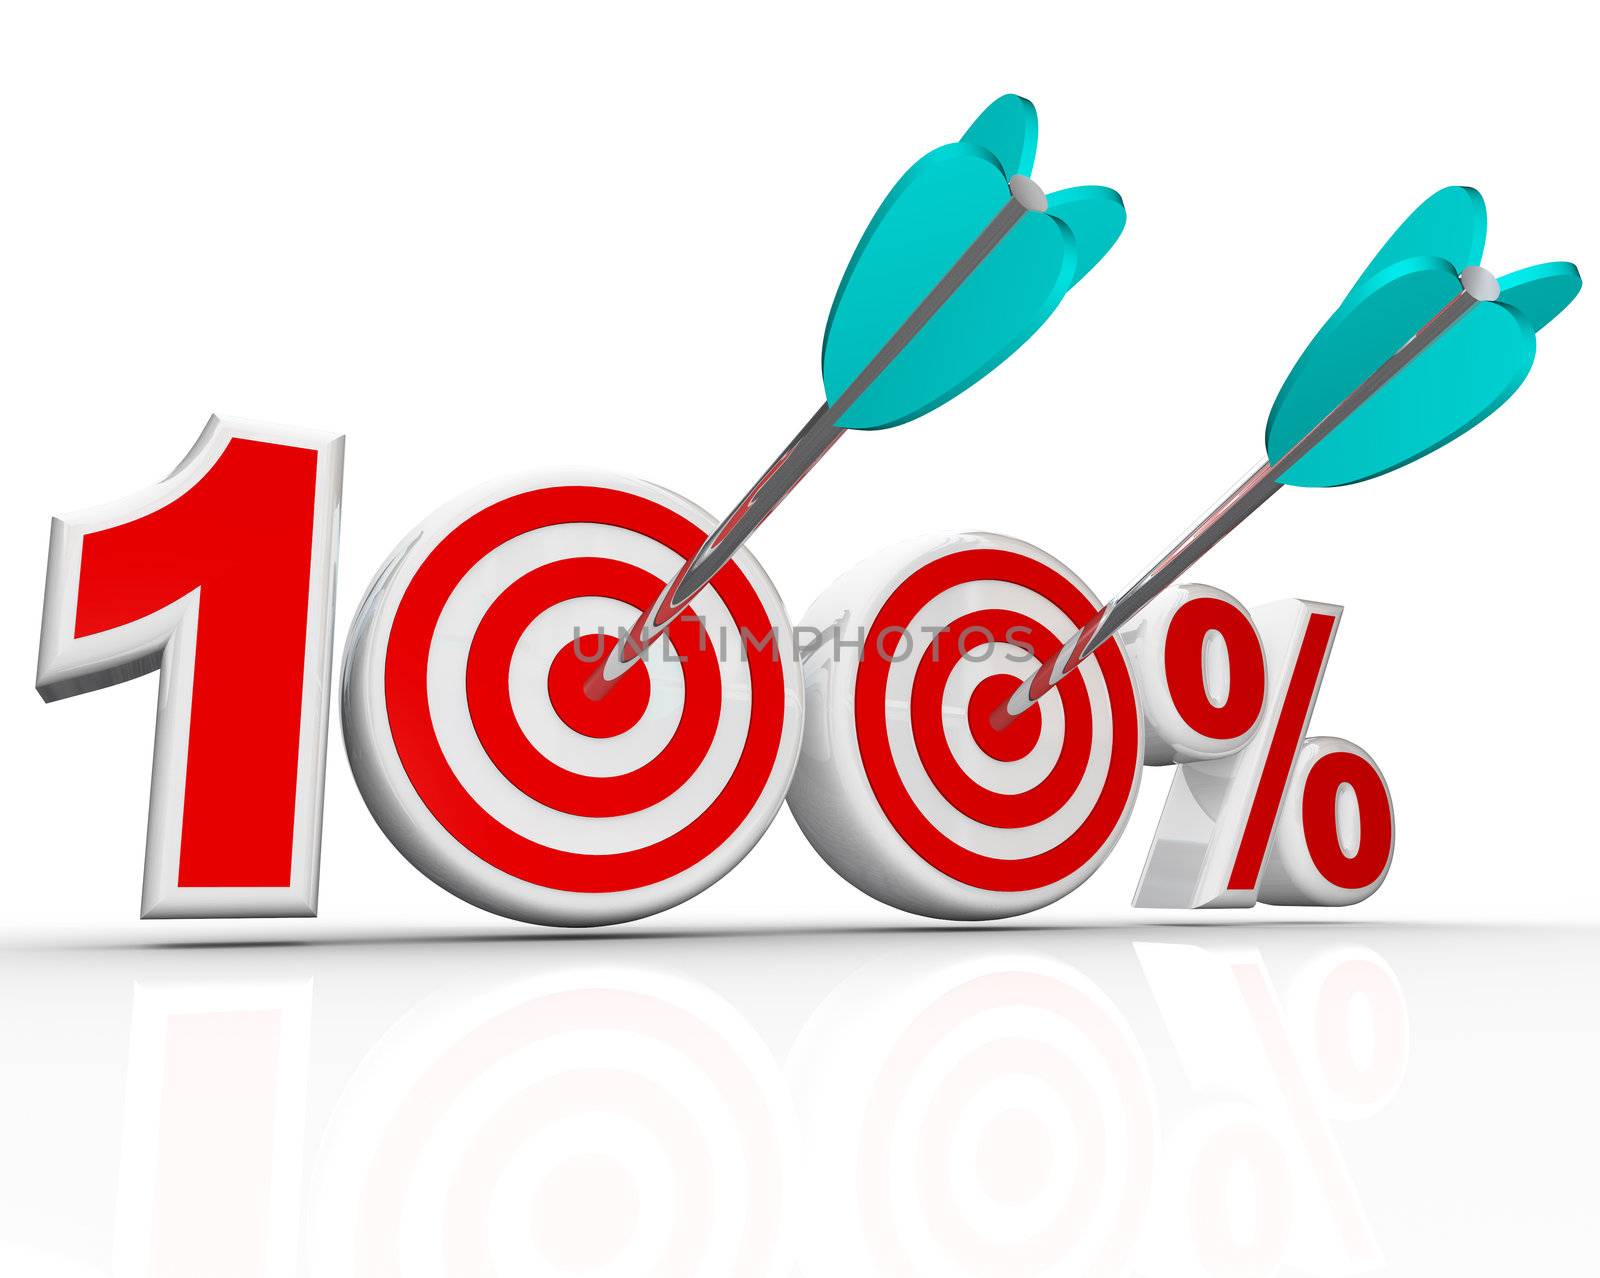 100 Percent Arrows in Targets Perfect Score by iQoncept